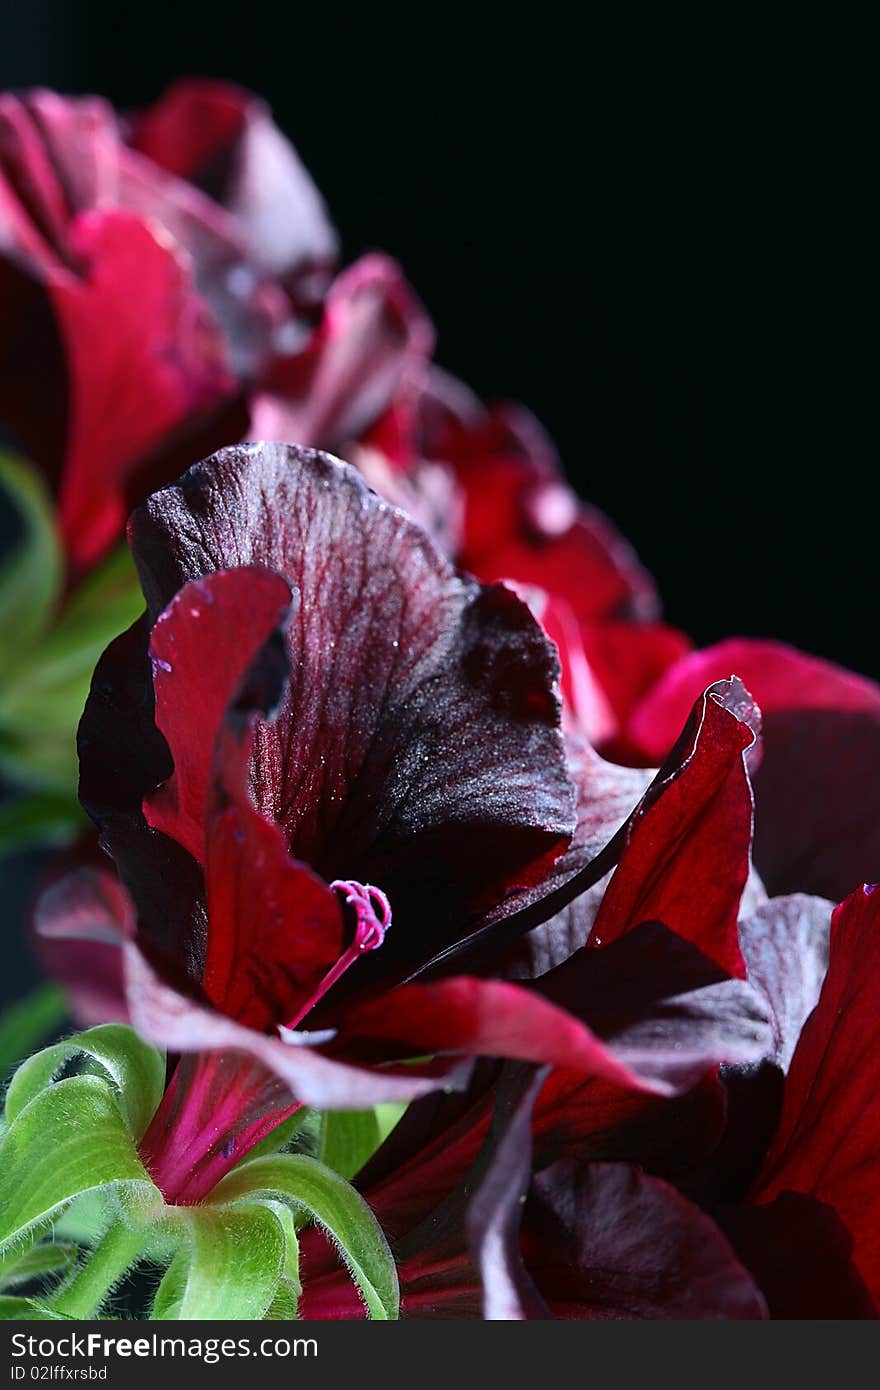 Flowers of a black geranium are used in dressing of garden sites on a black background.